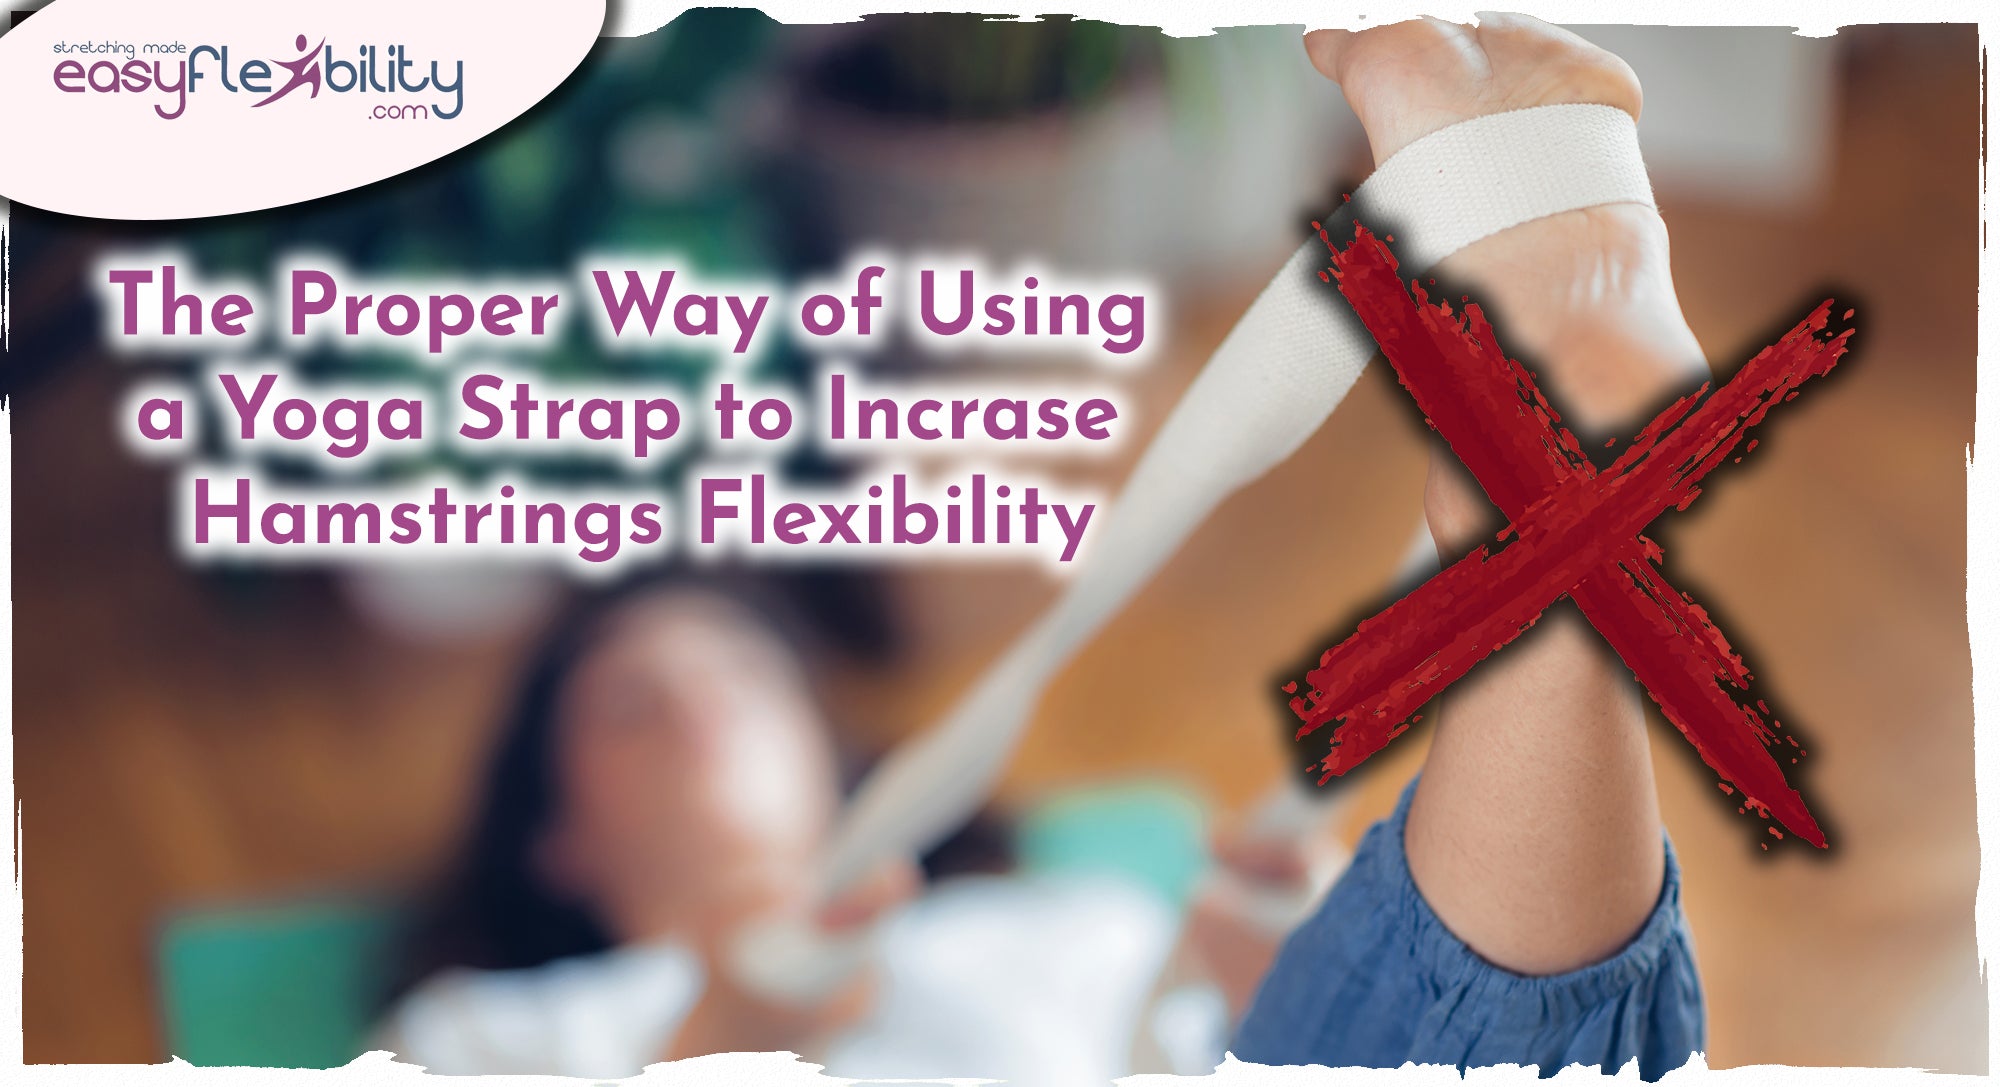 The Proper Way of Using a Yoga Strap to Increase Hamstrings Flexibility